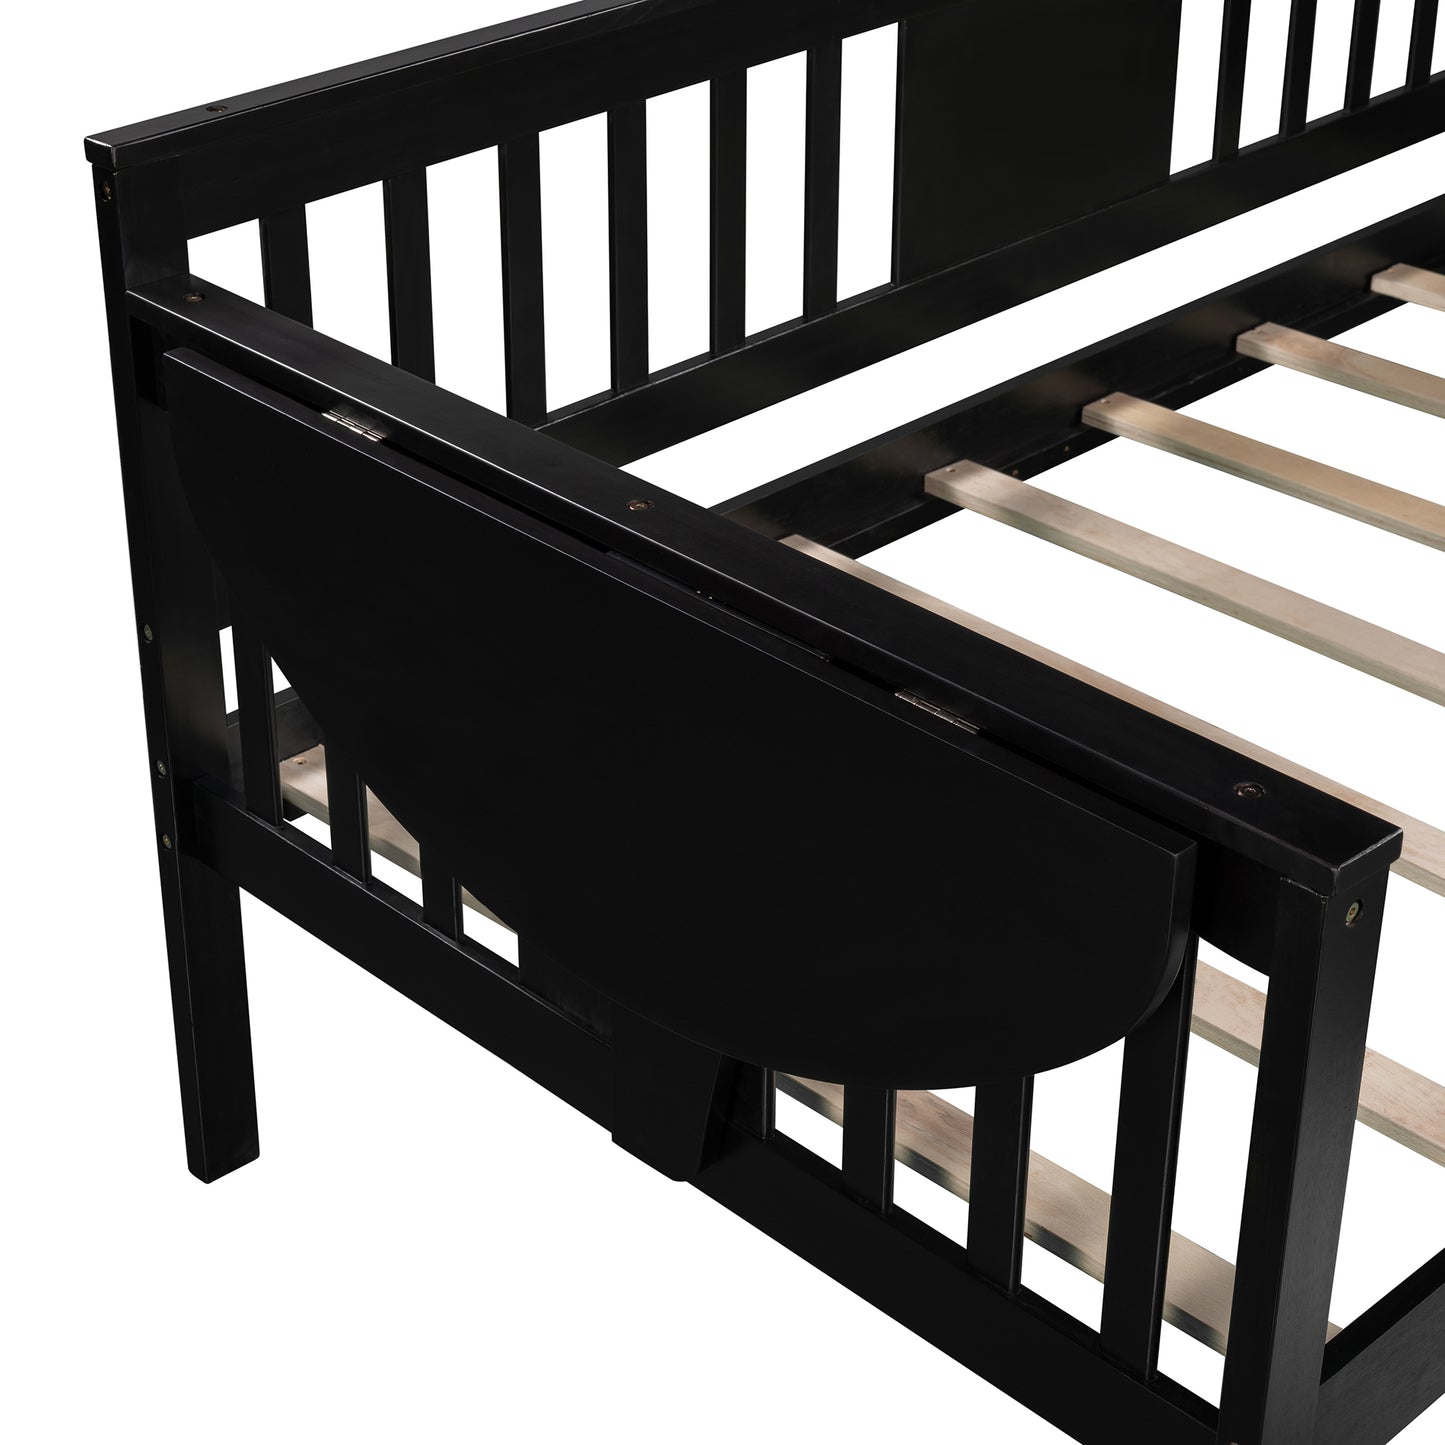 Twin size Daybed, Wood Slat Support, Espresso